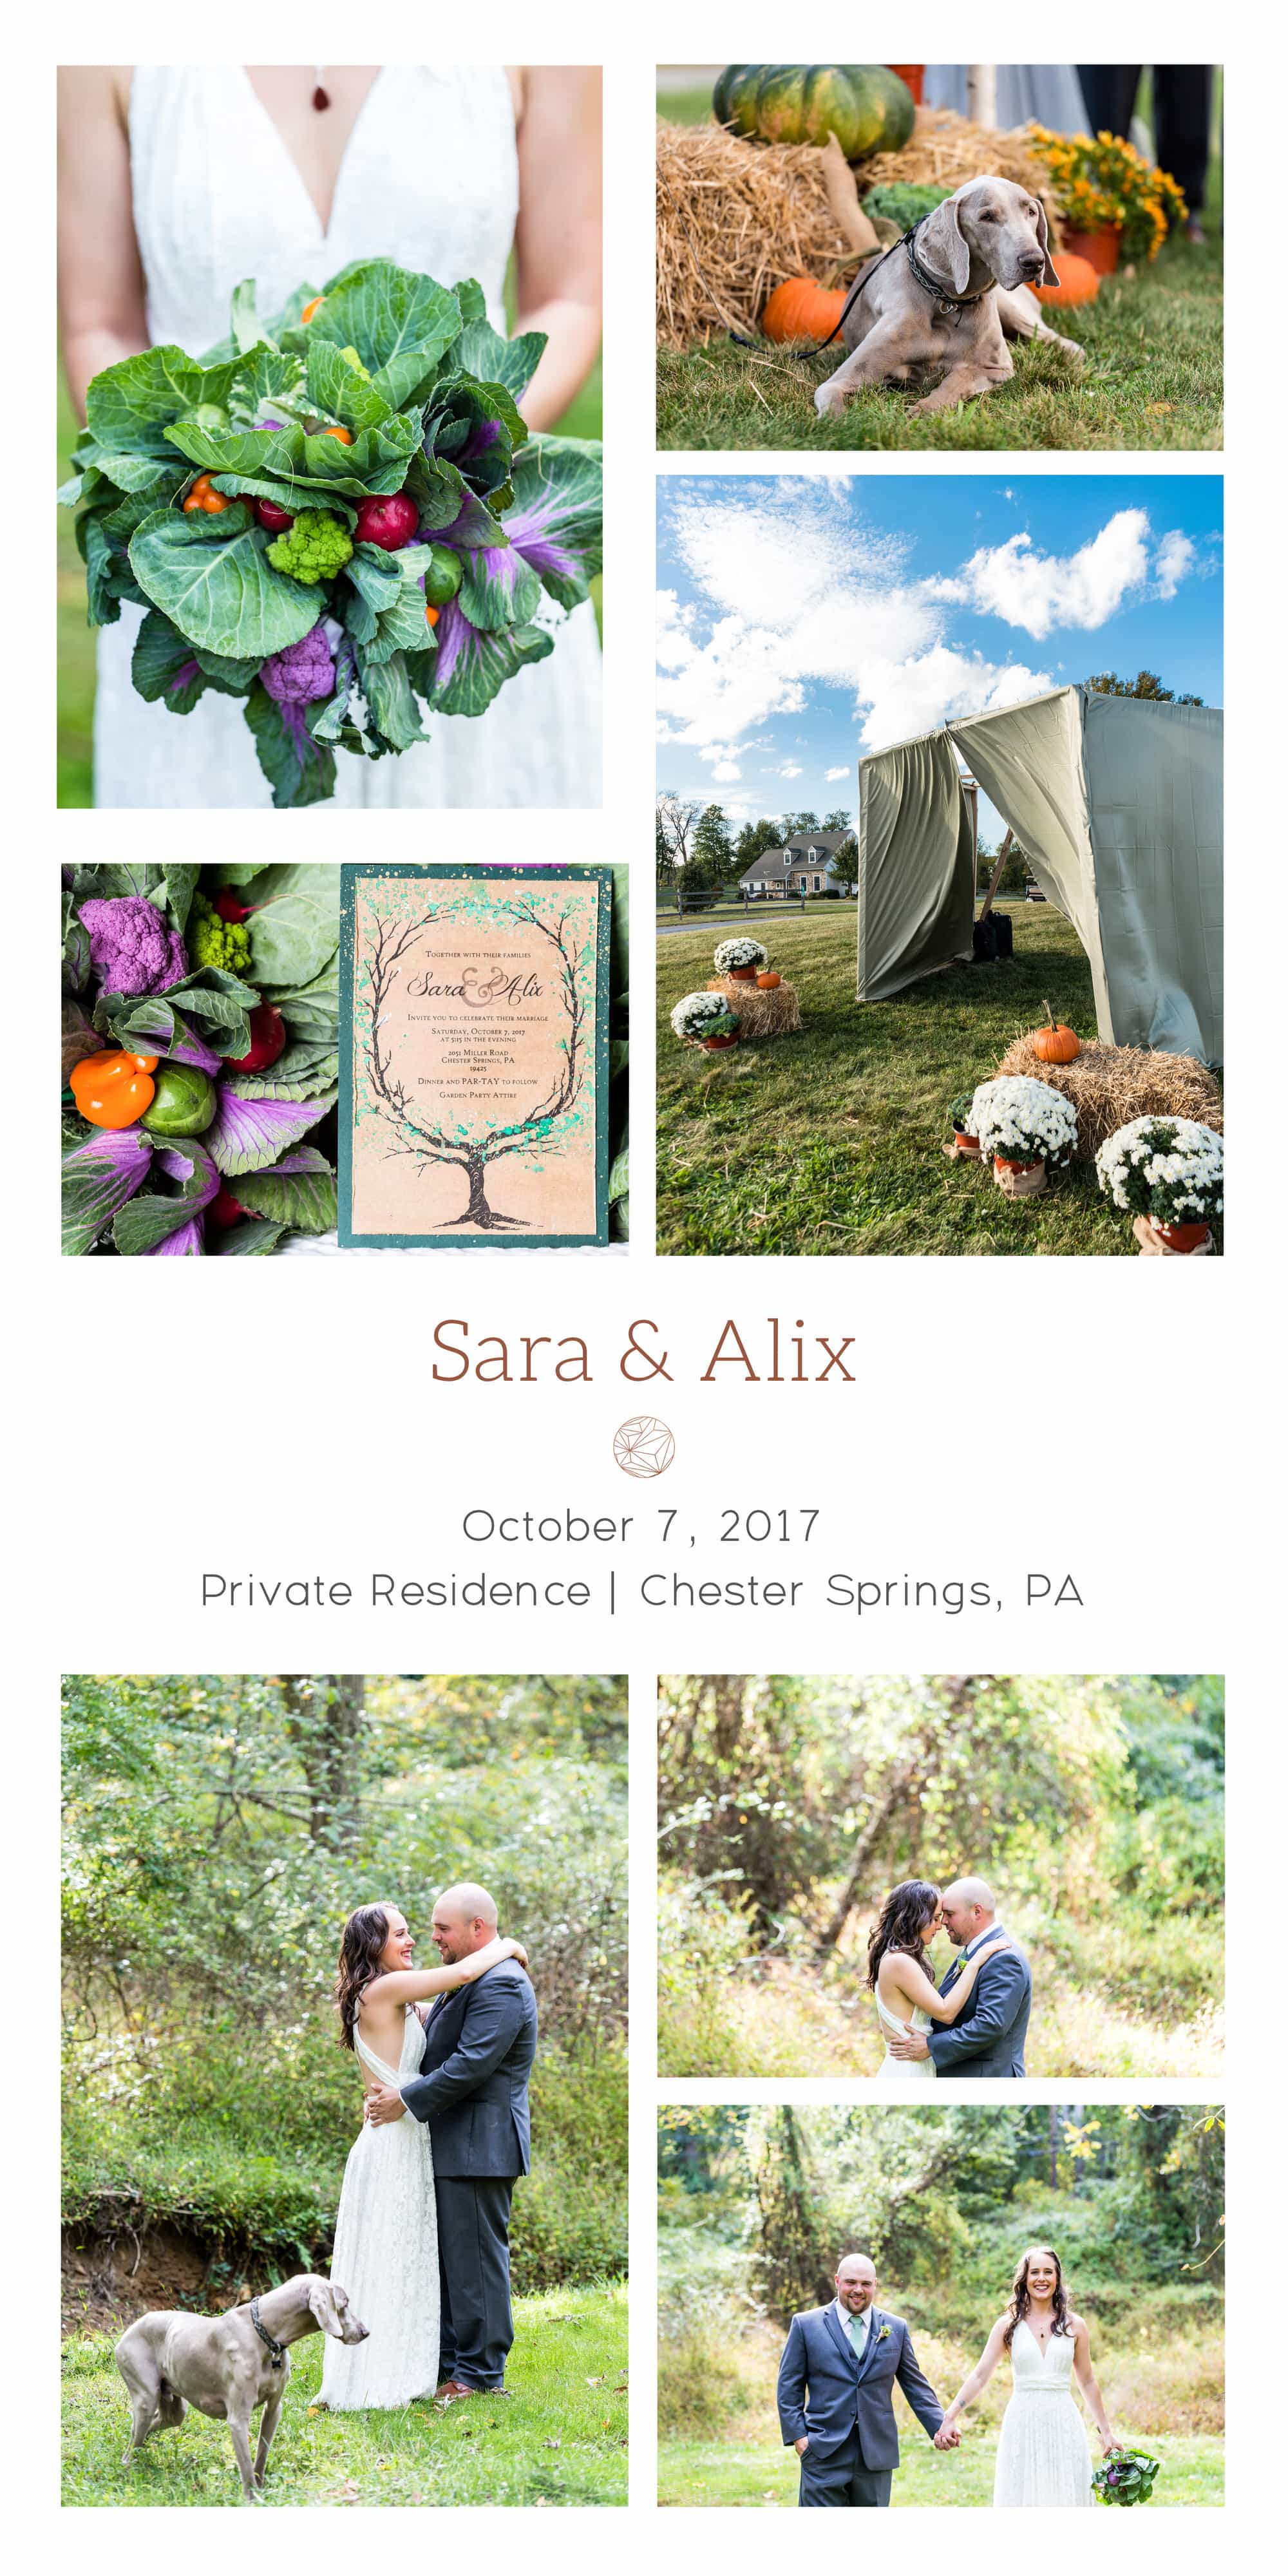 Collage of wedding details from this October Chester Springs wedding, including tree of life invitation, vegetable bouquet, and jewish wedding ceremony decorations with pumpkins and mums.